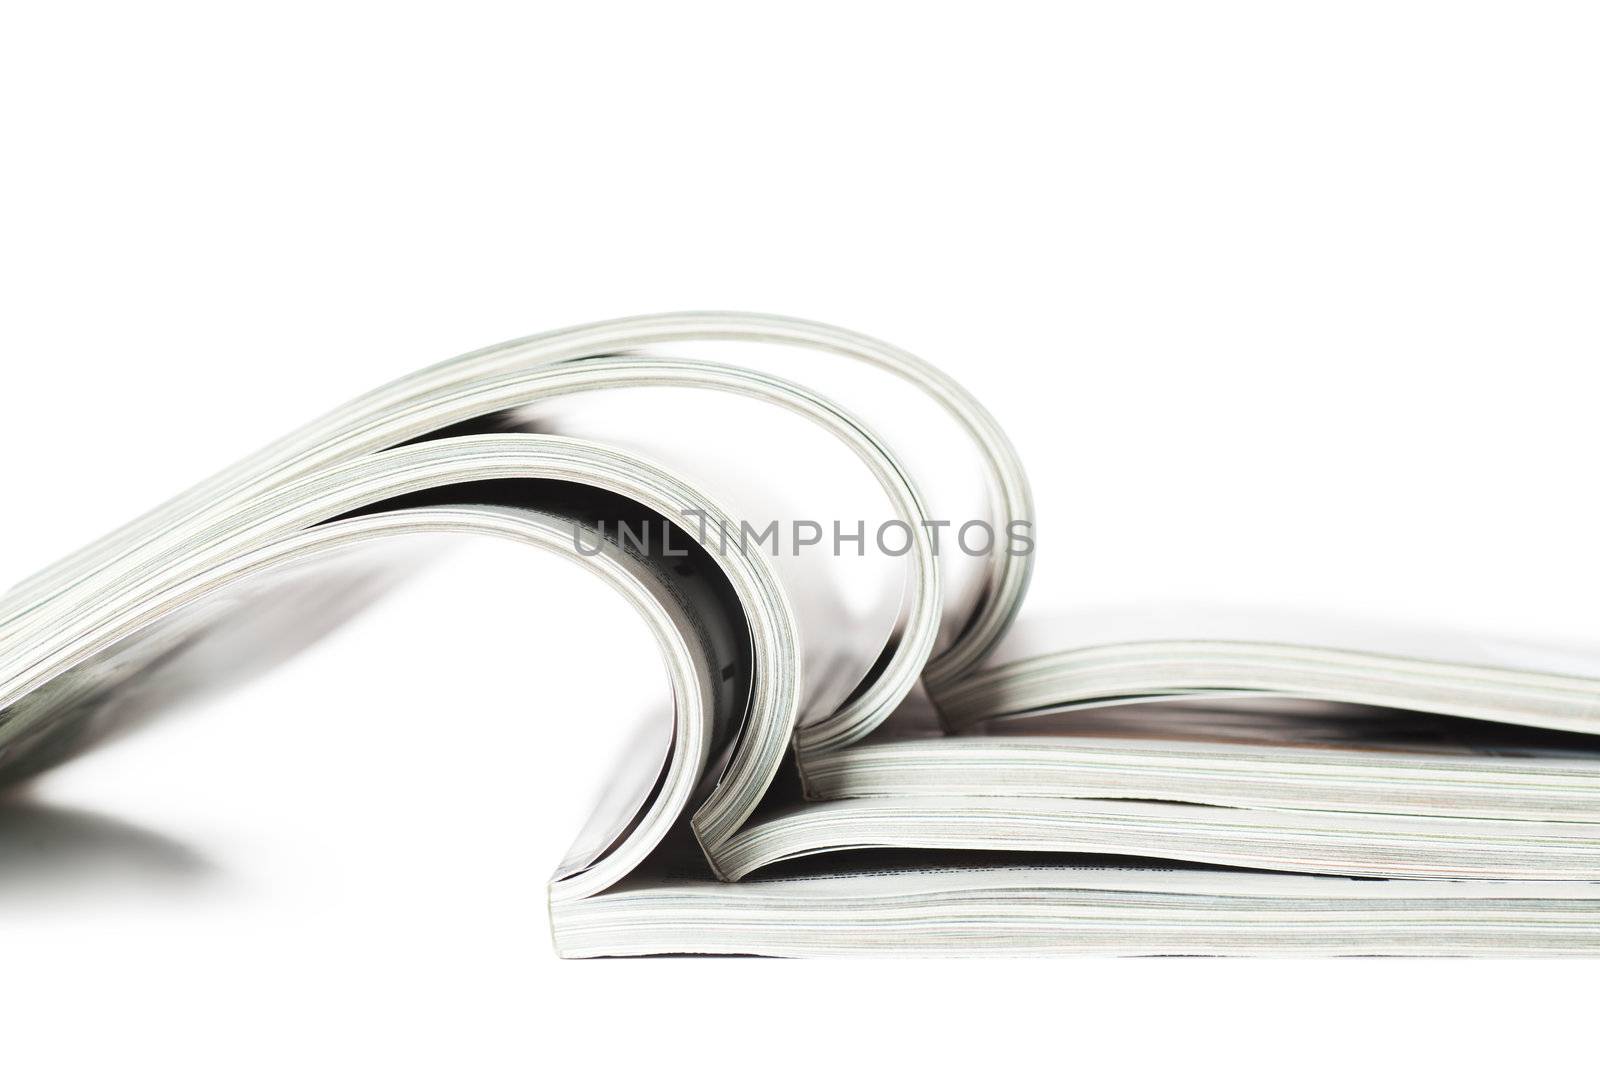 Selective focus image of magazines in profile